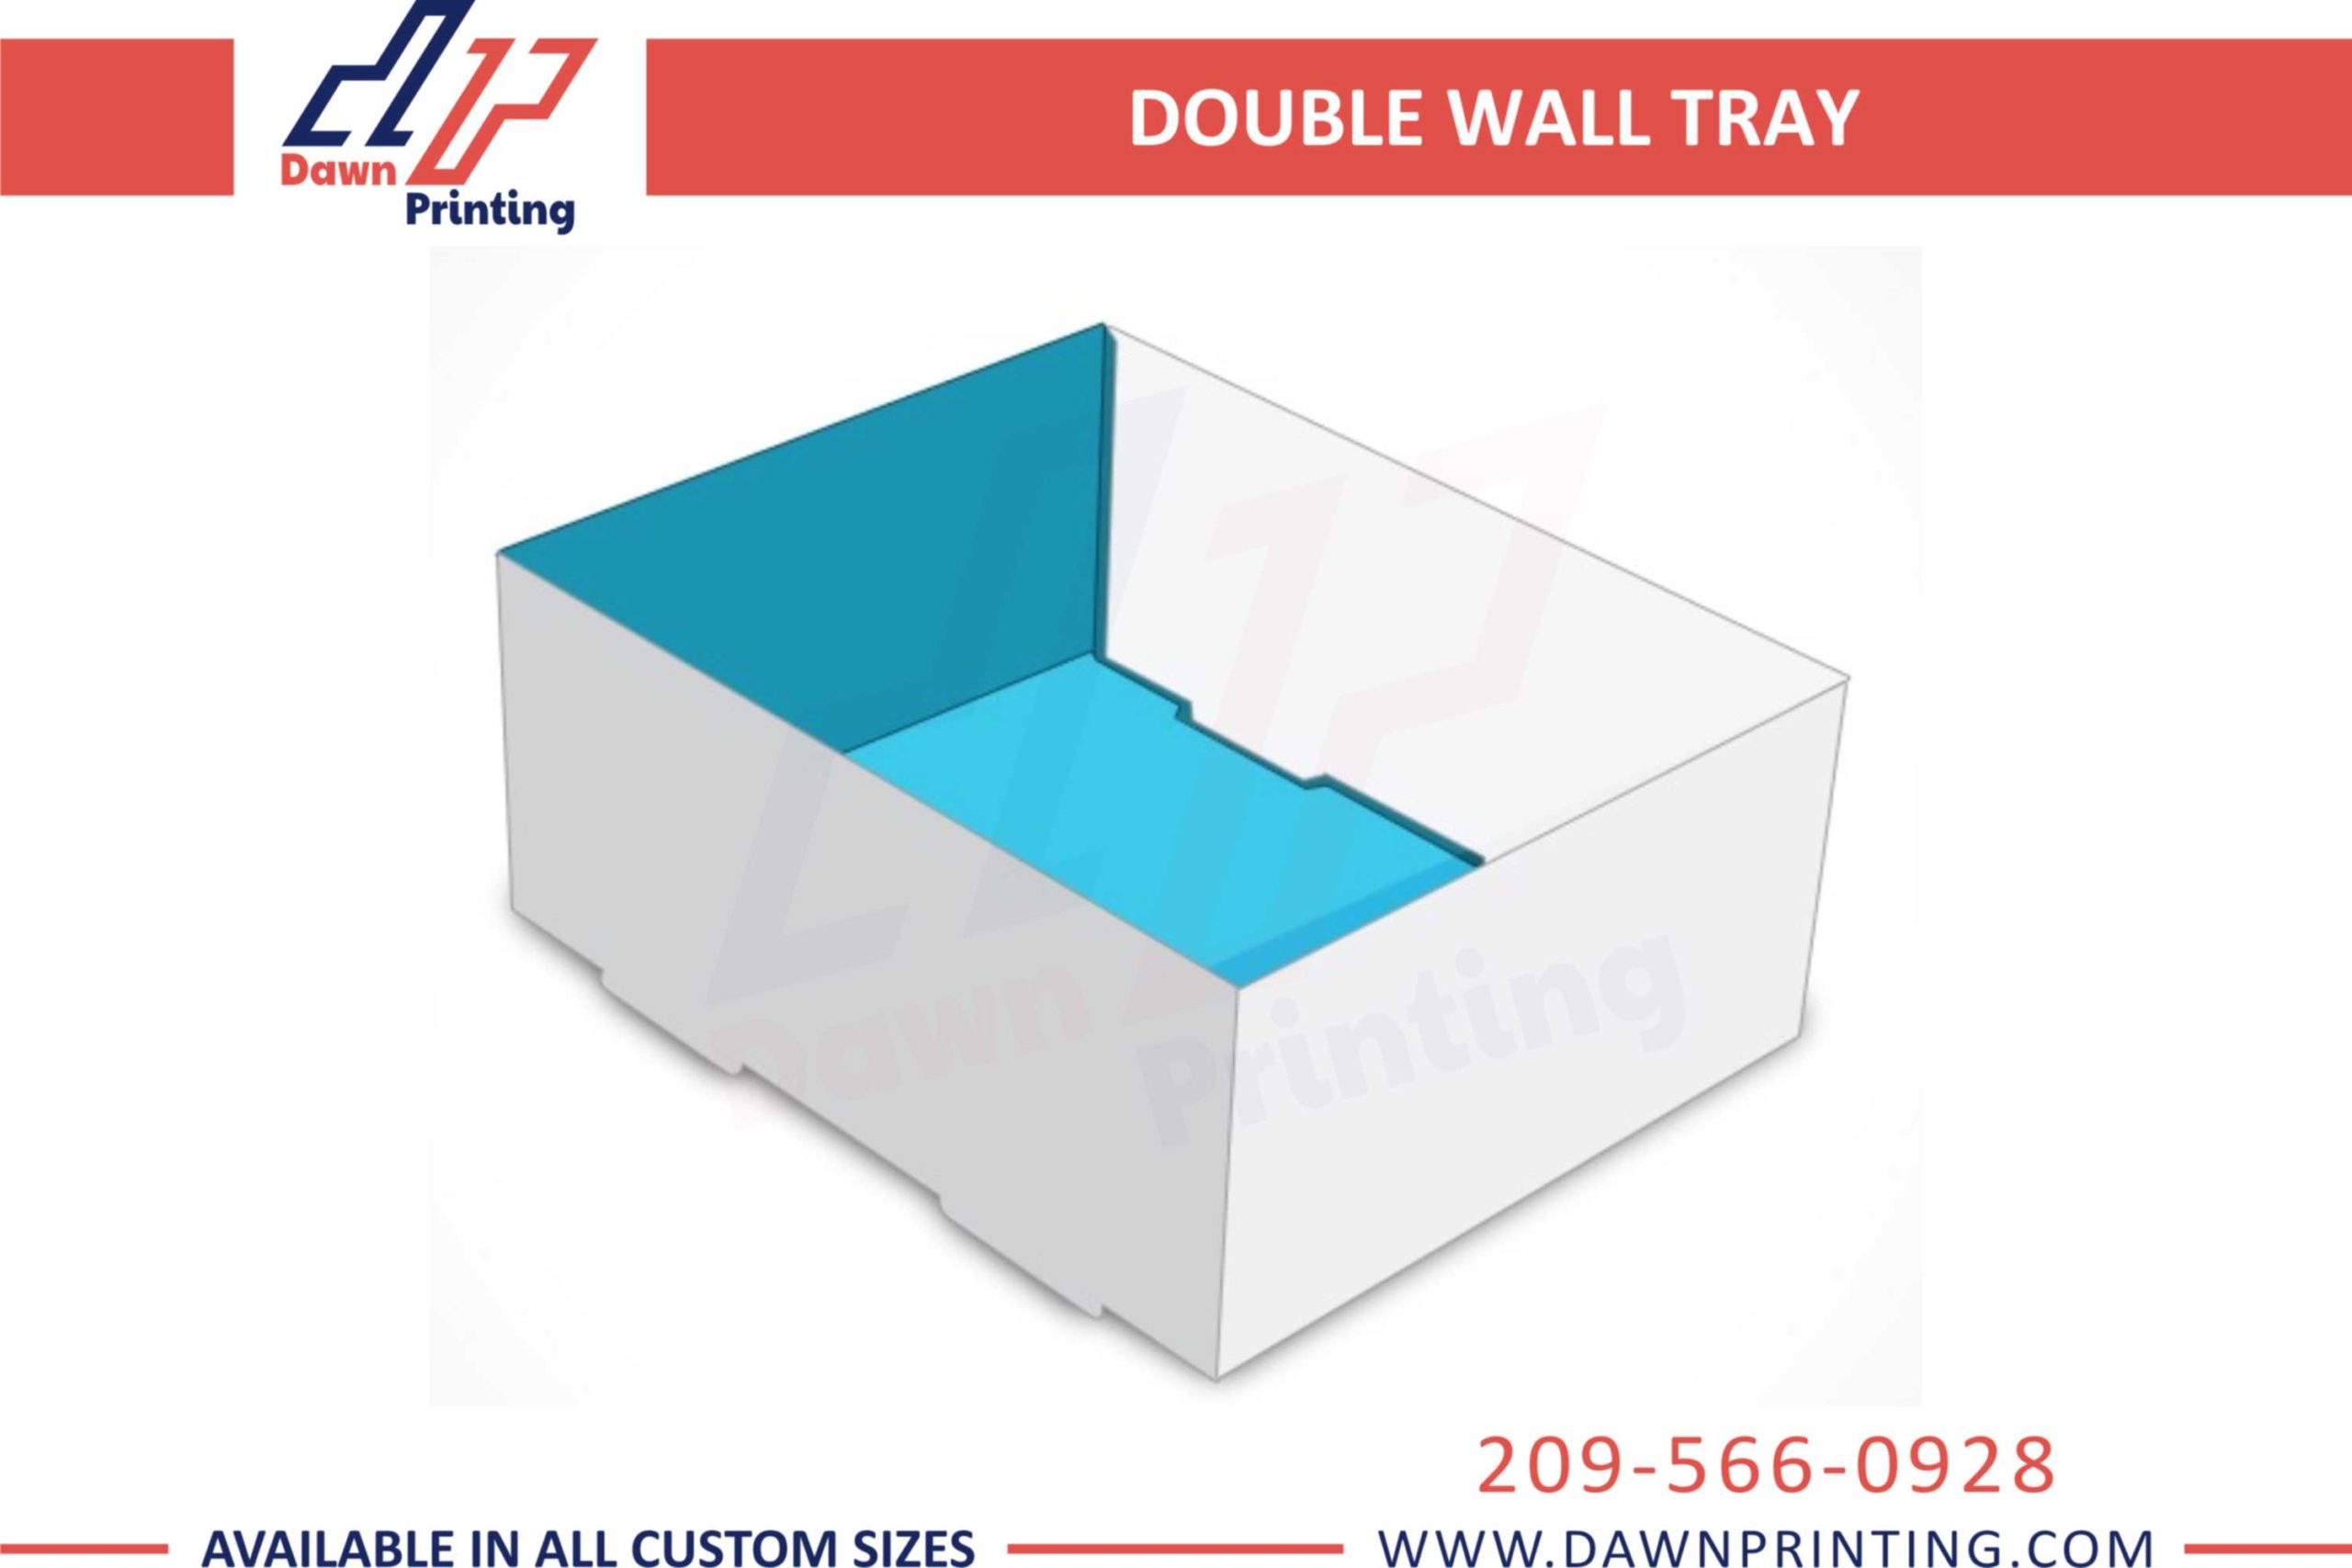 Custom Printed Double Wall Tray For Boxes - Dawn Printing